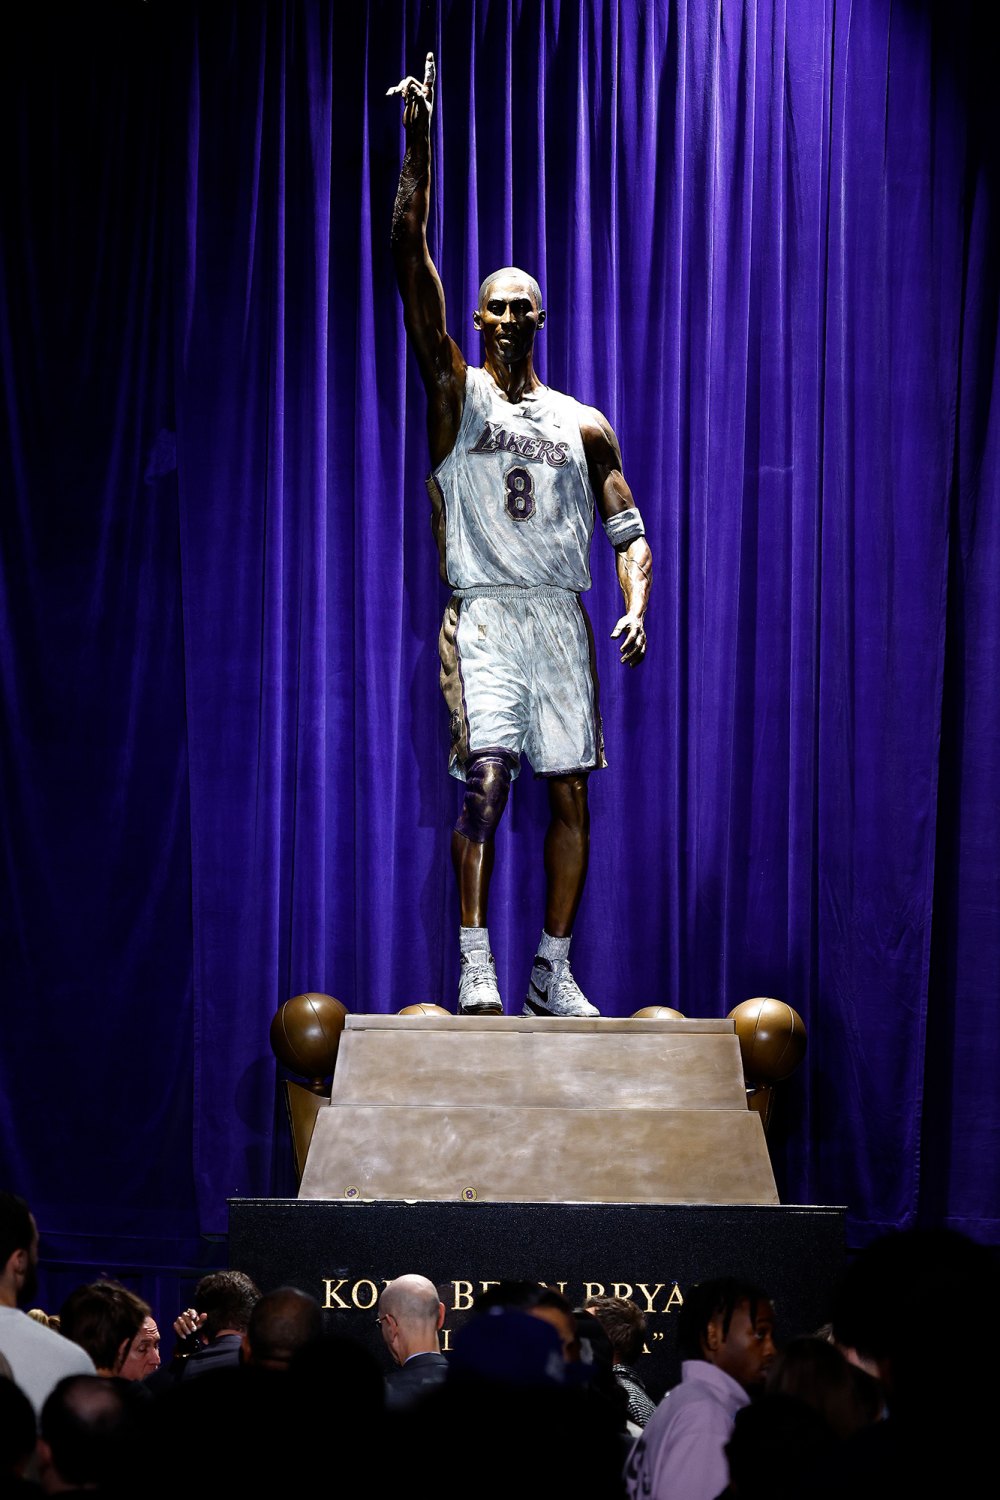 Kobe Bryant’s Family Attends Statue Unveiling at Crypto.com Arena: ‘This Is For All of You’